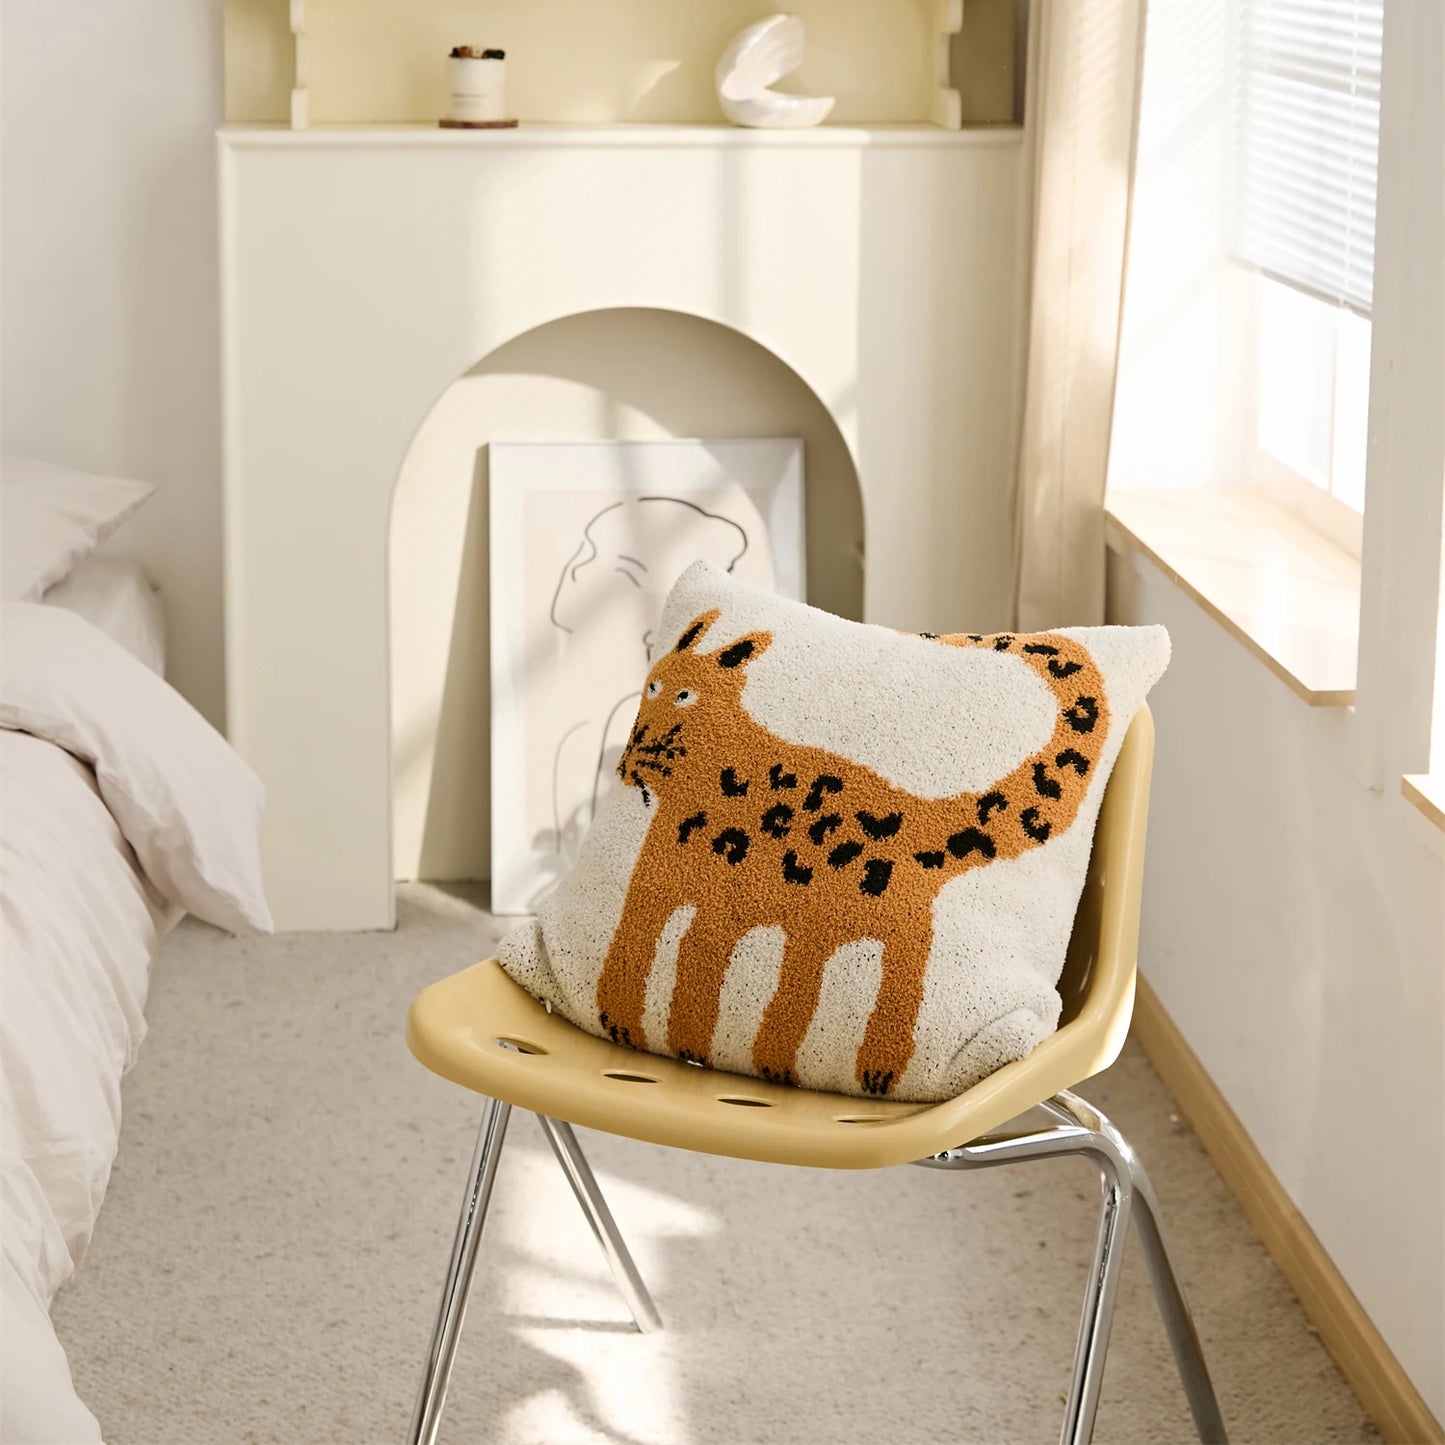 Spot Cat Knitted Cushion Cover